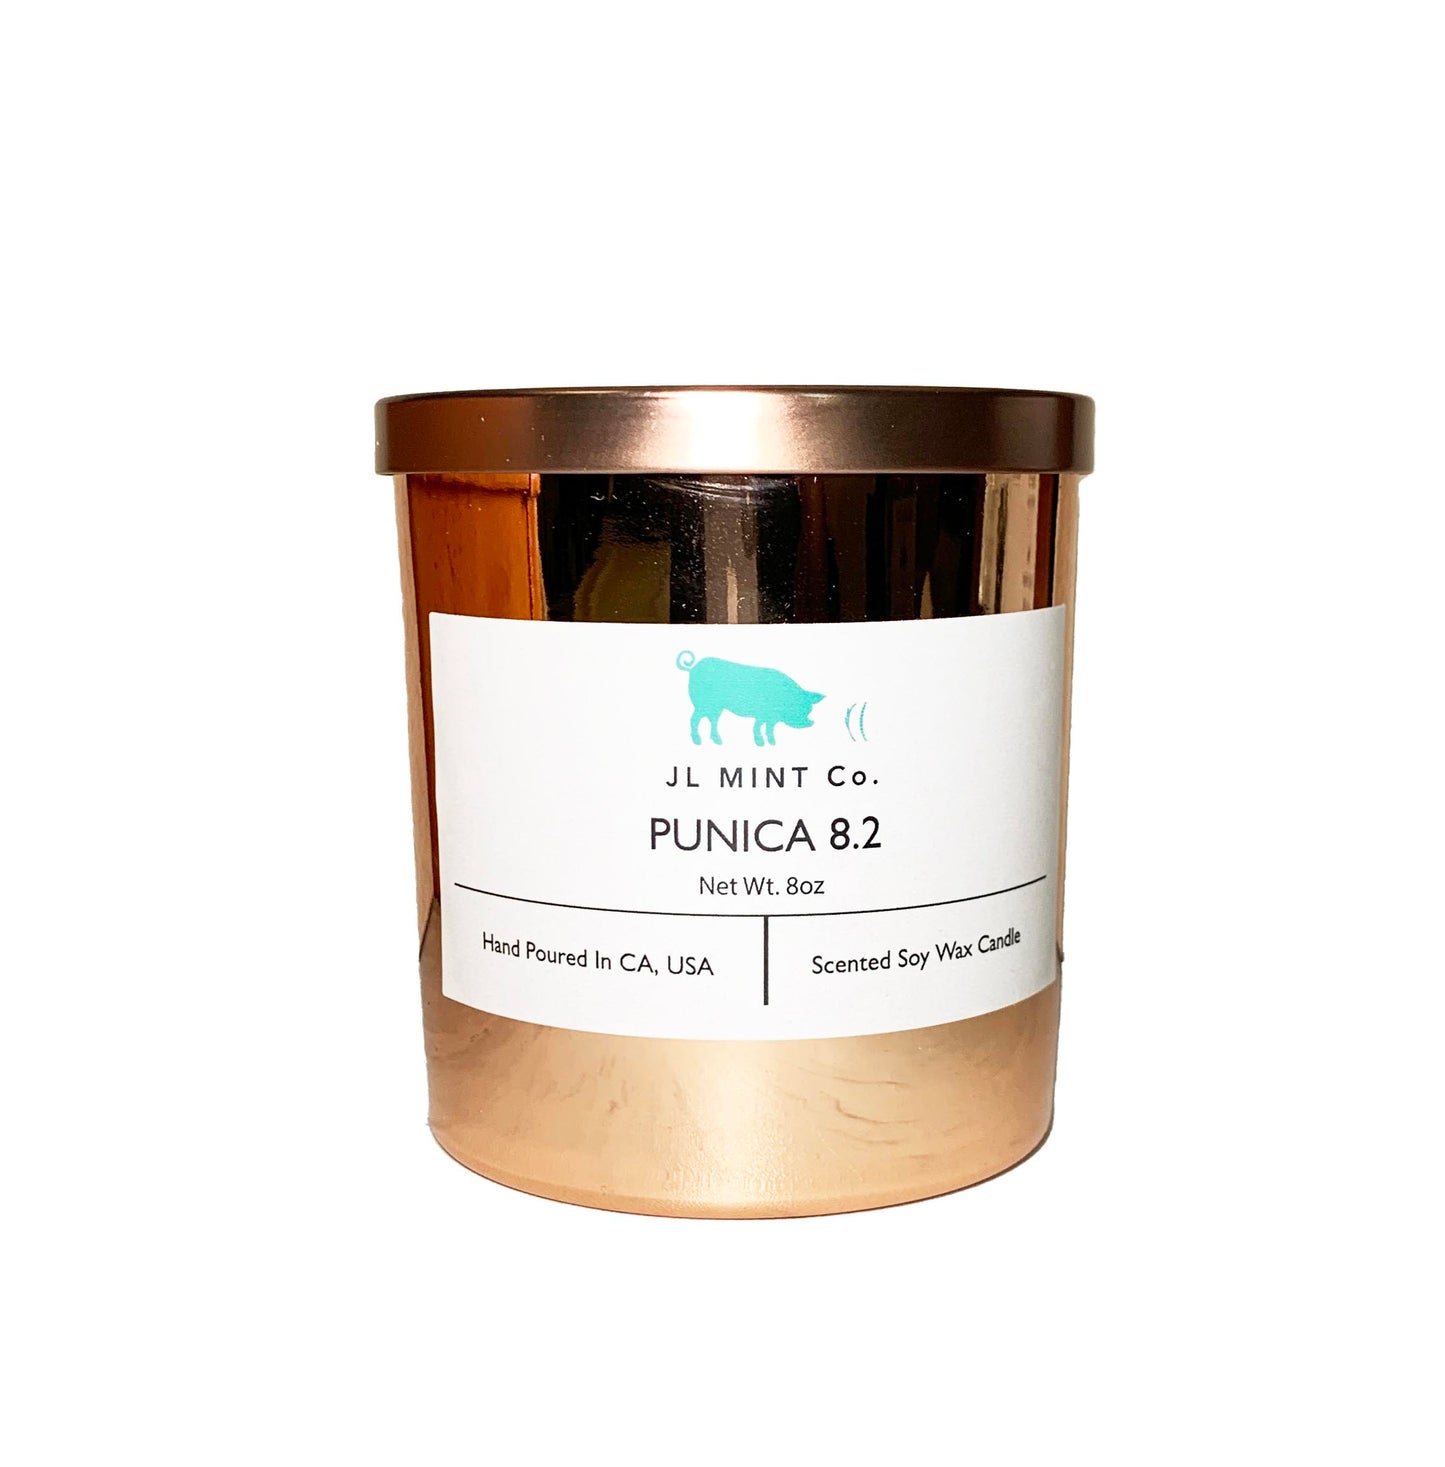 PUNICA 8.2 JL Mint Co. Soy Wax Candle